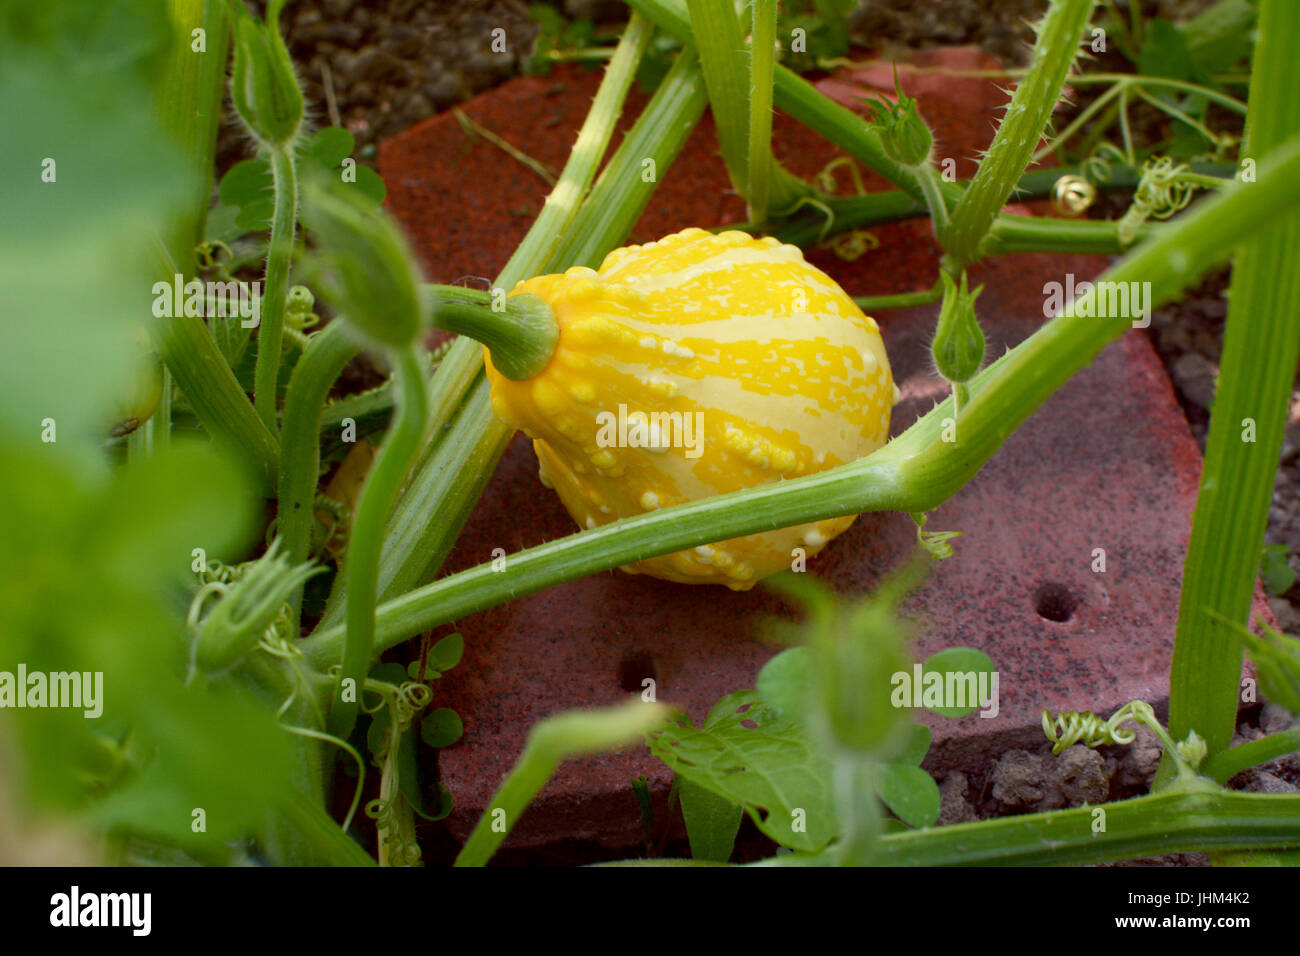 Yellow and cream ornamental gourd grows among dense plant vines and flower buds Stock Photo